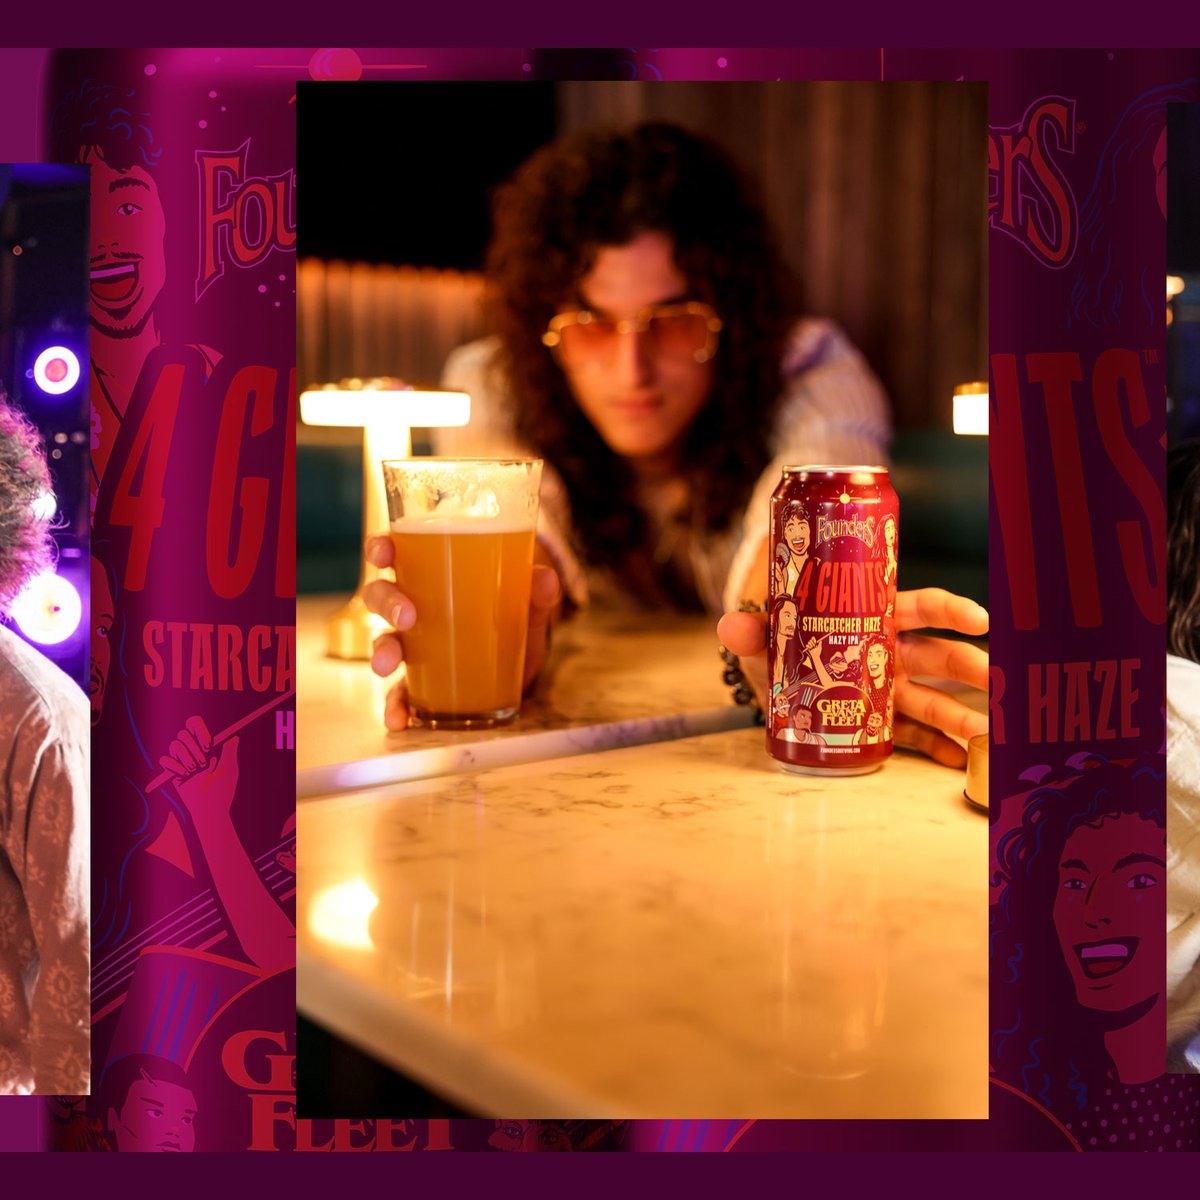 Collaboration alert! We partnered with the rock and roll prowess of Greta Van Fleet to create a new beer: 4 Giants Starcatcher Haze IPA! 

 Learn more about this collaboration at the link! bit.ly/StarcatcherHaze